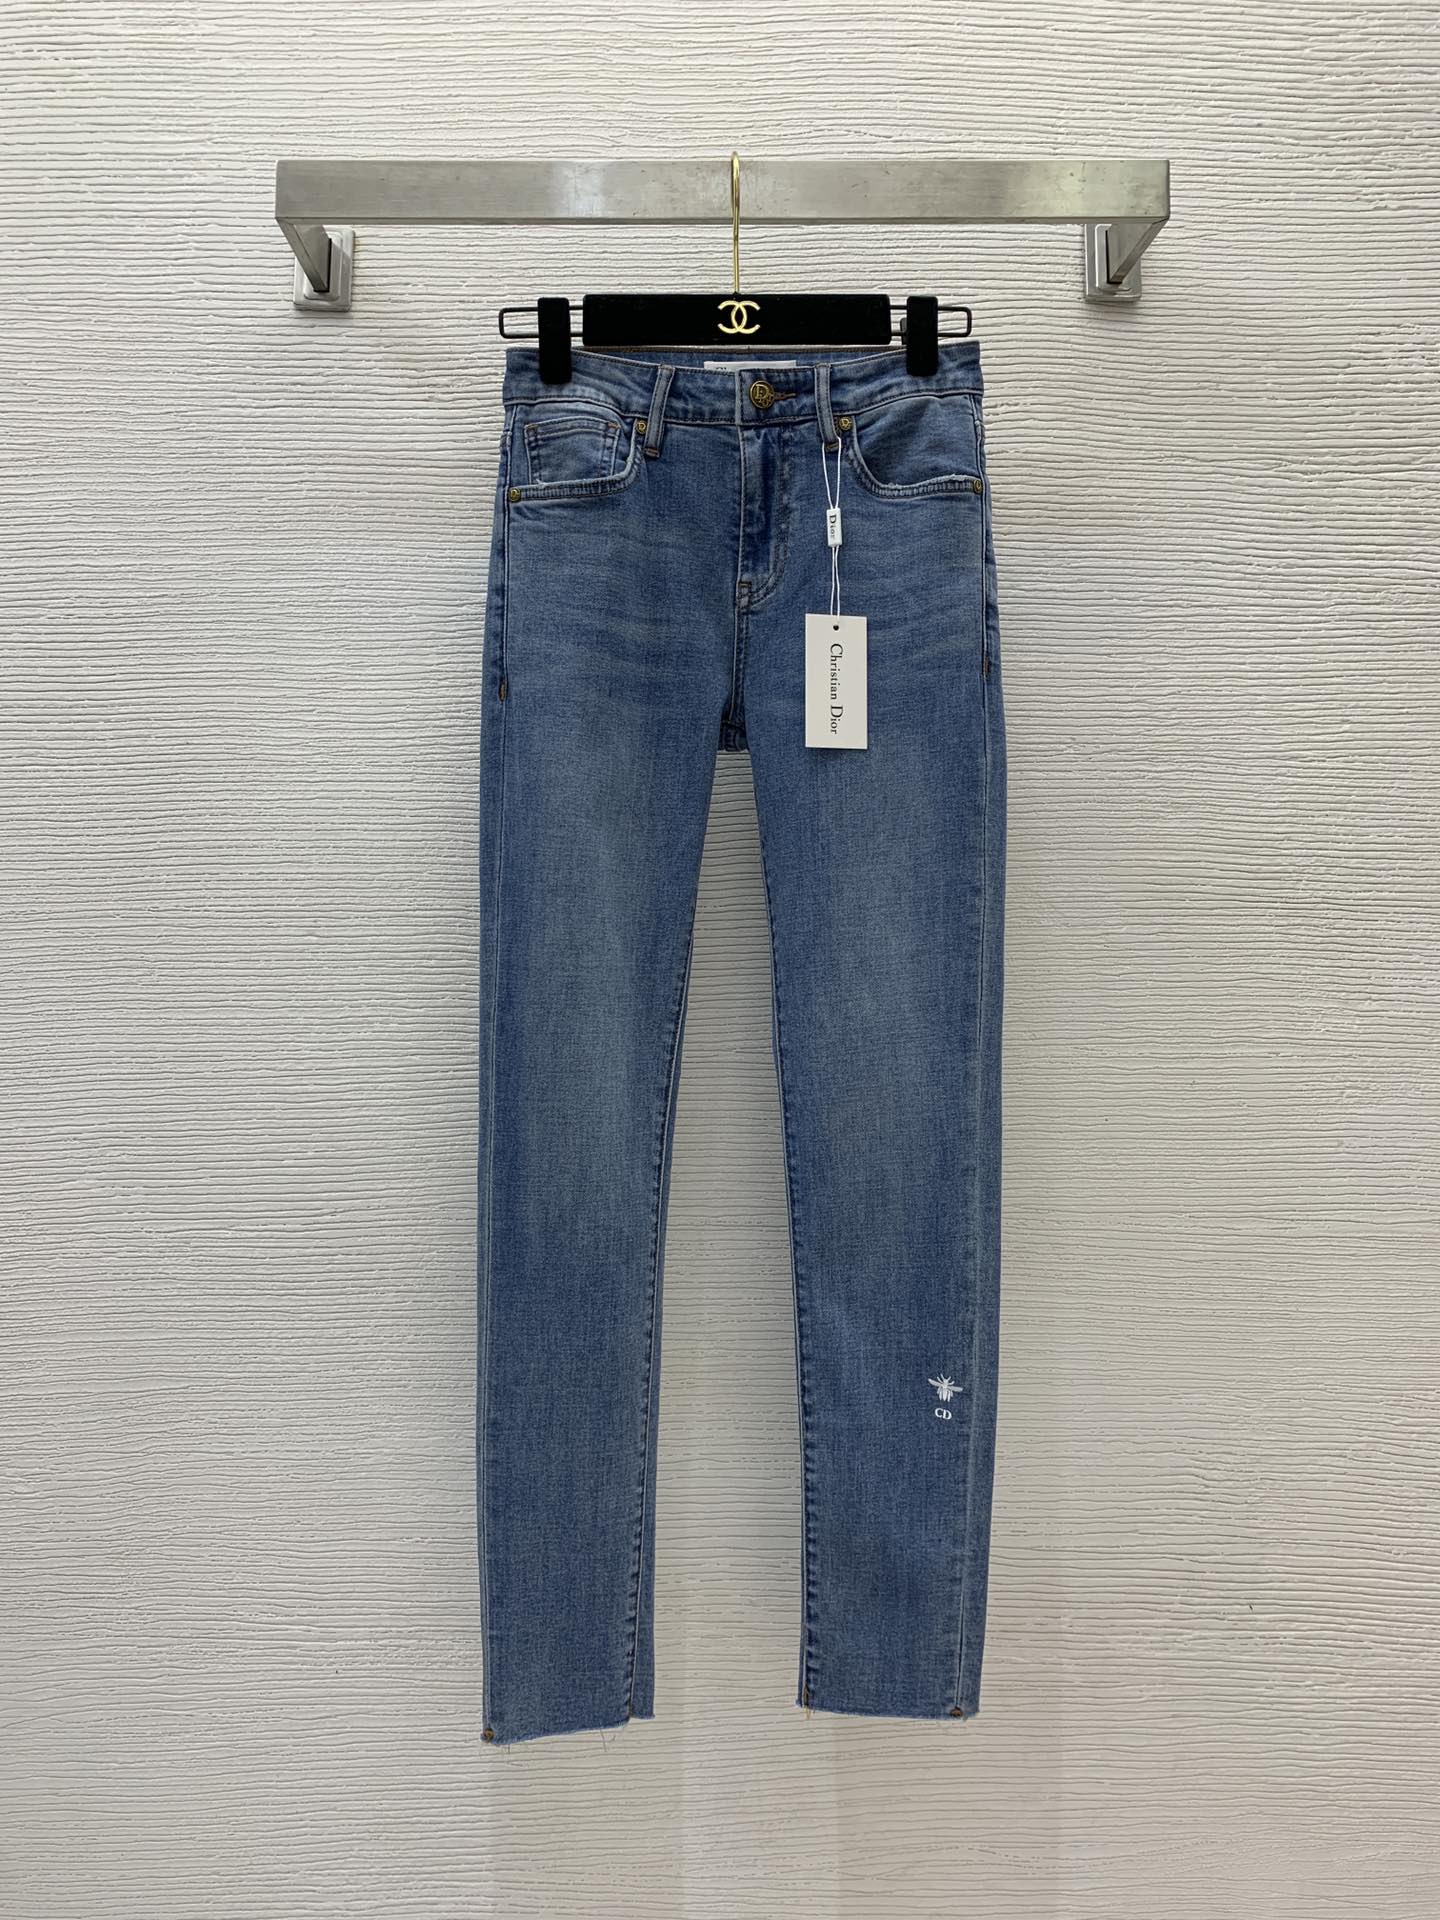 Where to Buy
 Dior Clothing Jeans Black Blue Grey Embroidery Cotton Spring/Summer Collection